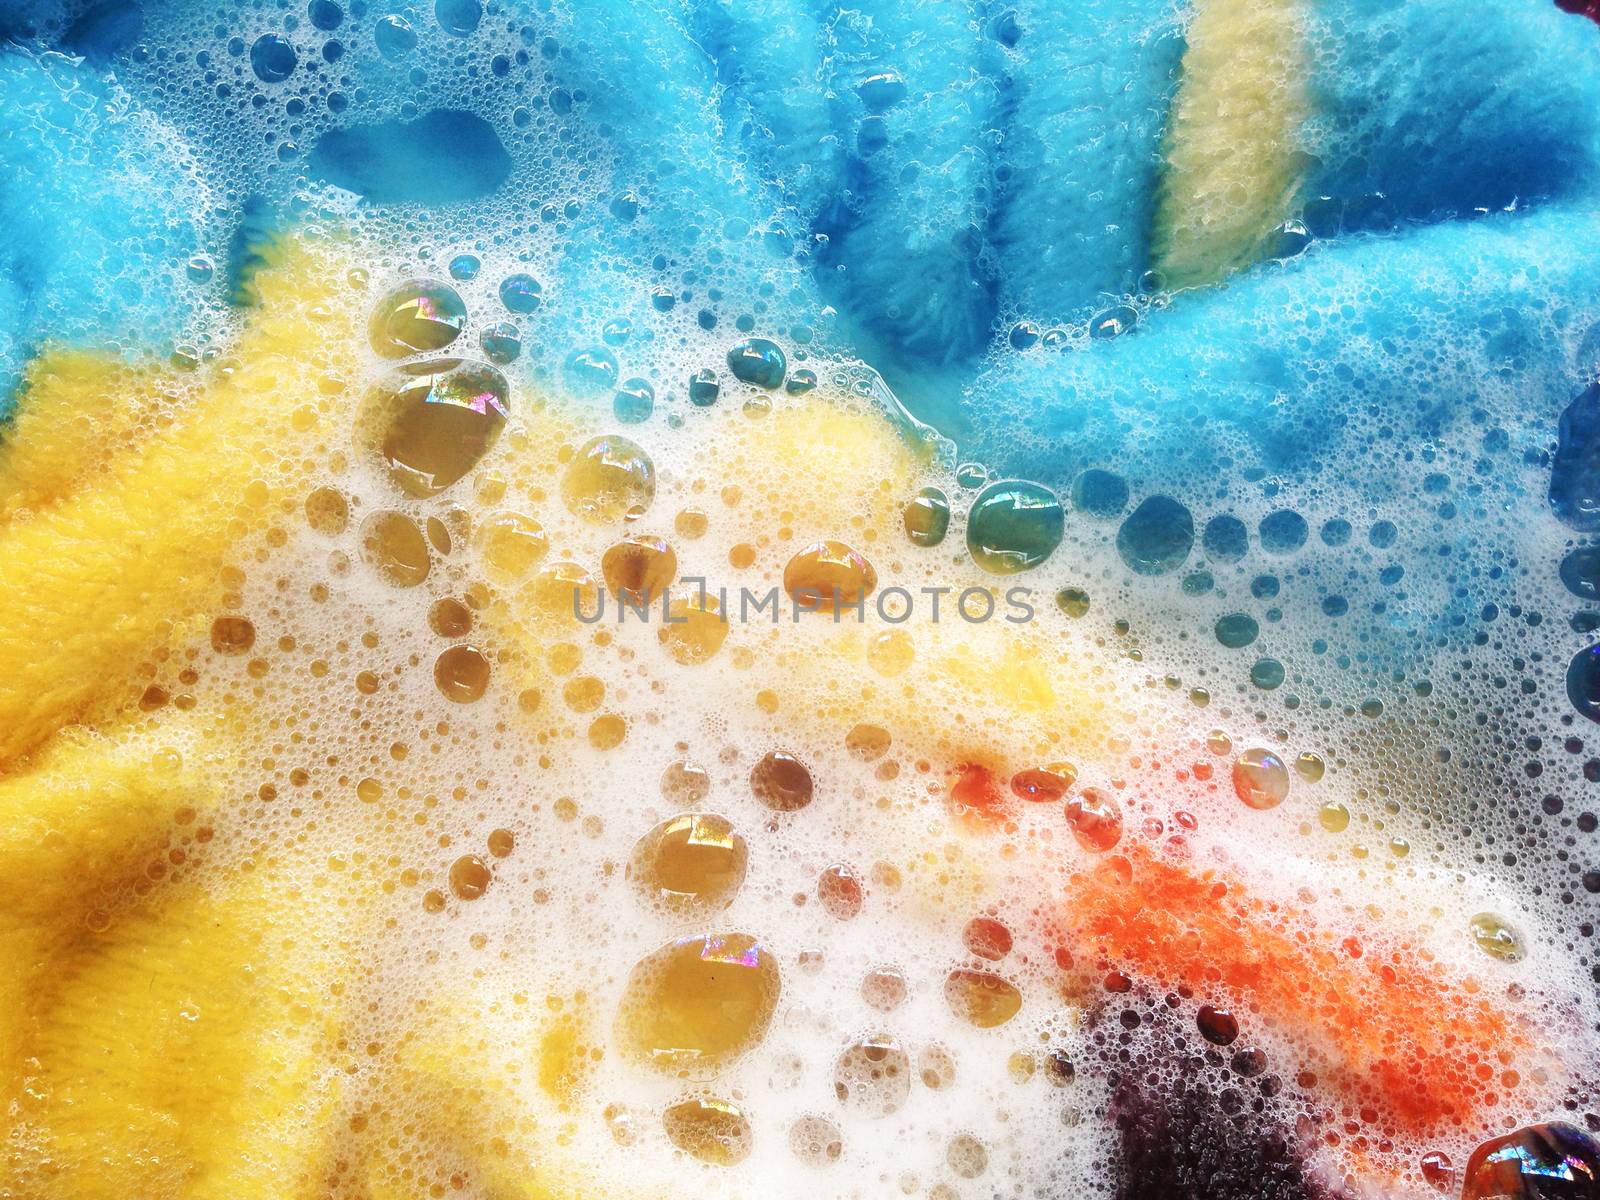 Colorful clean, Soak a cloth before washing by Bowonpat